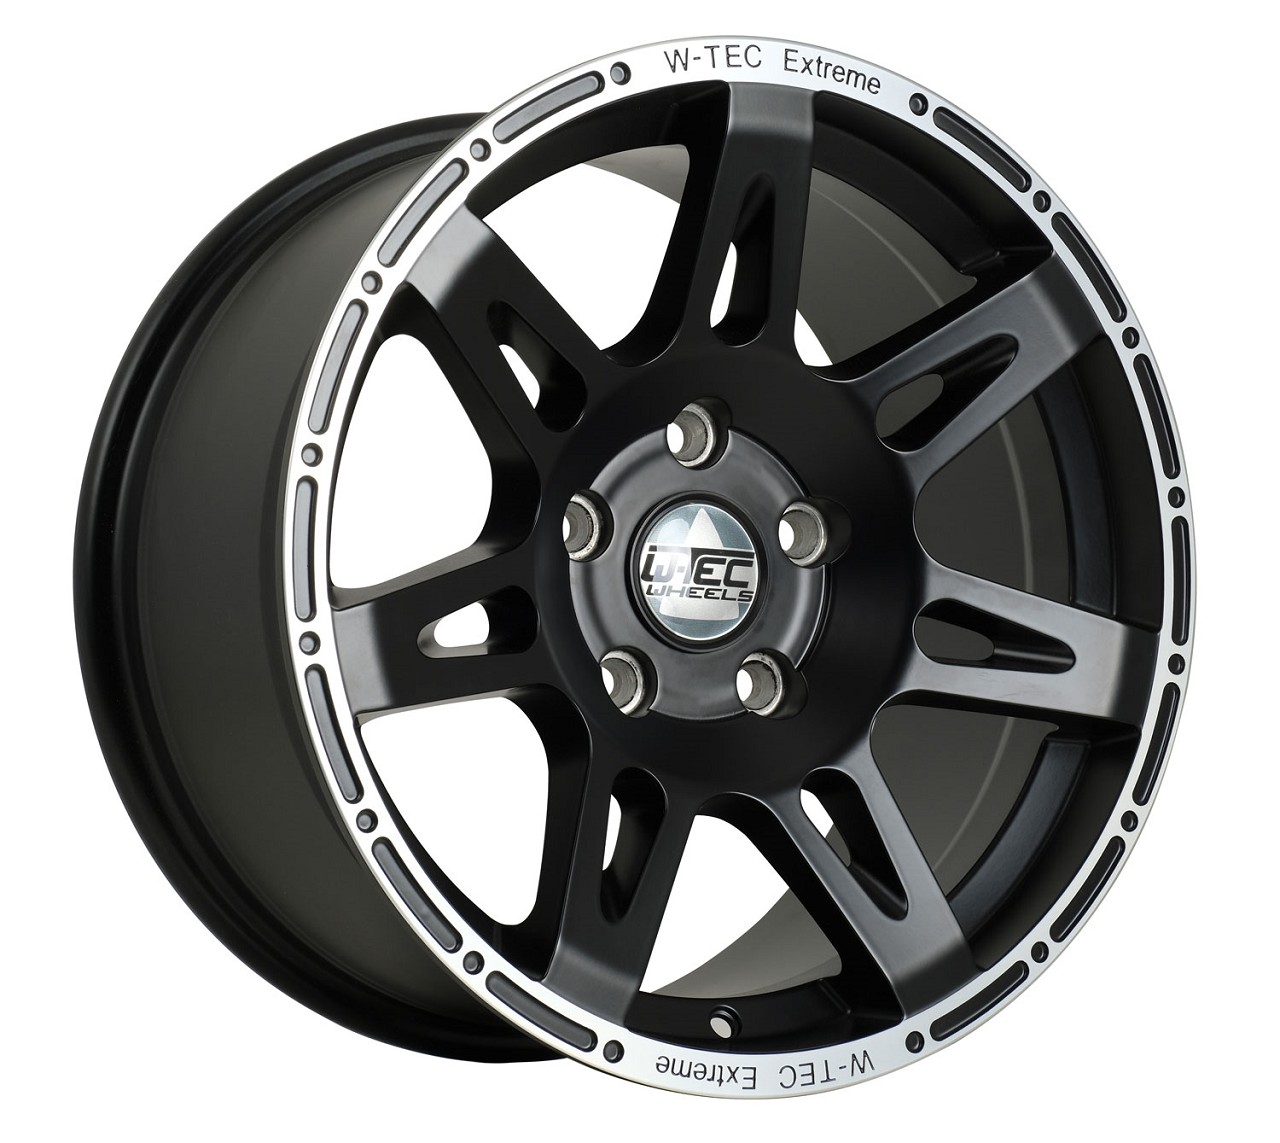 4x Alloy wheel W-TEC Extreme black-silver 8,5x17 offset+30 fits Jeep Commander WH (2006-2010)